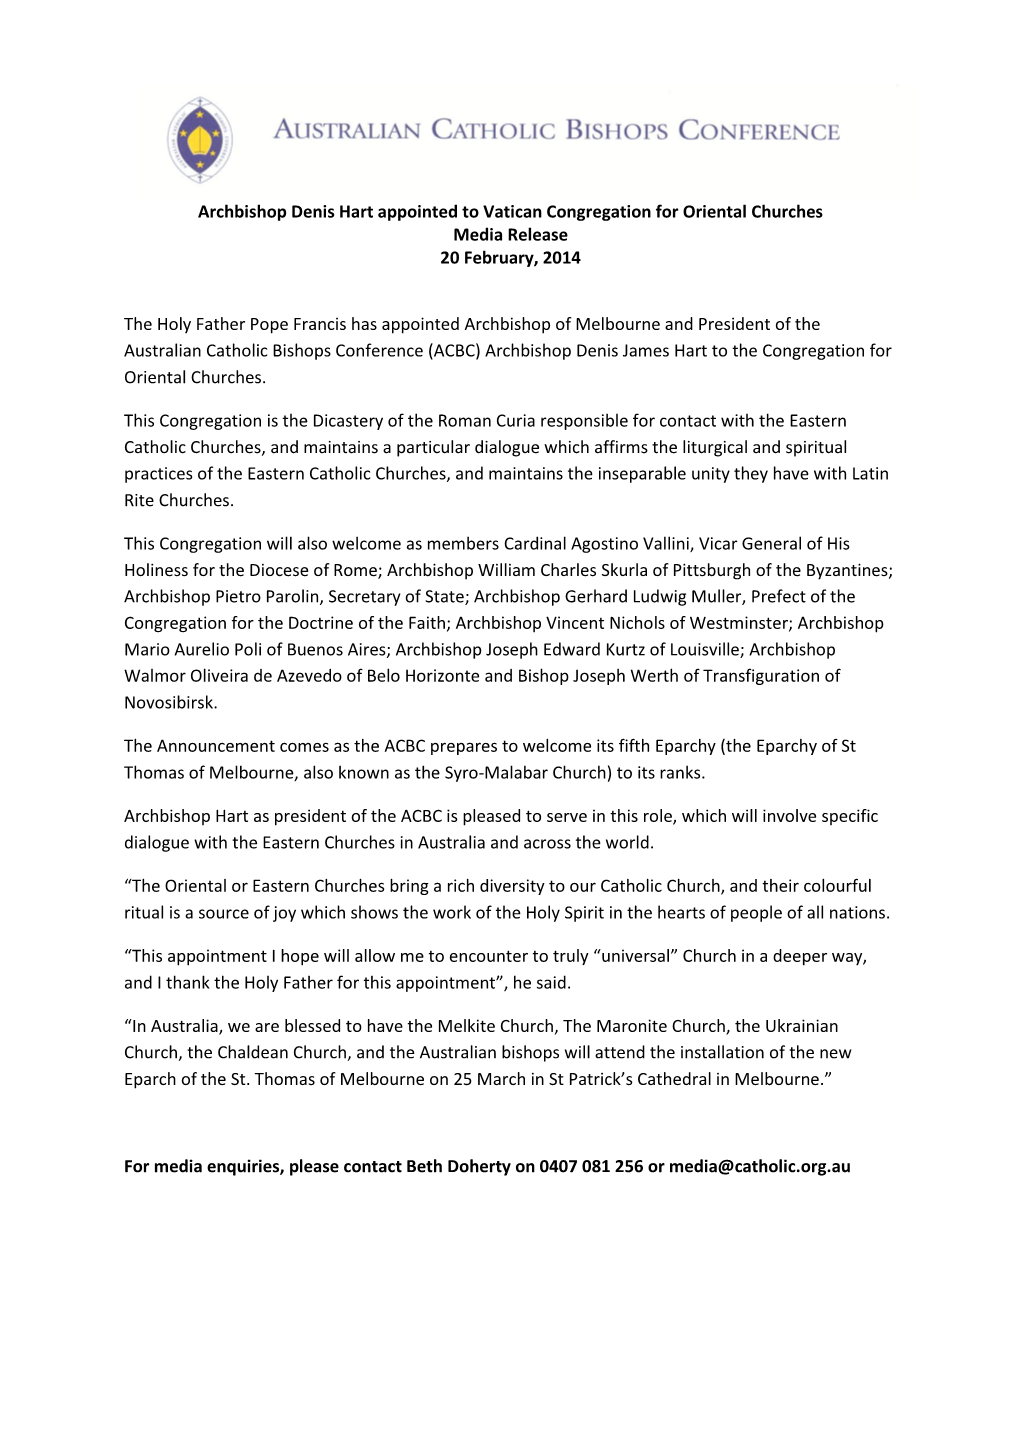 Archbishop Denis Hart Appointed to Vatican Congregation for Oriental Churches Media Release 20 February, 2014